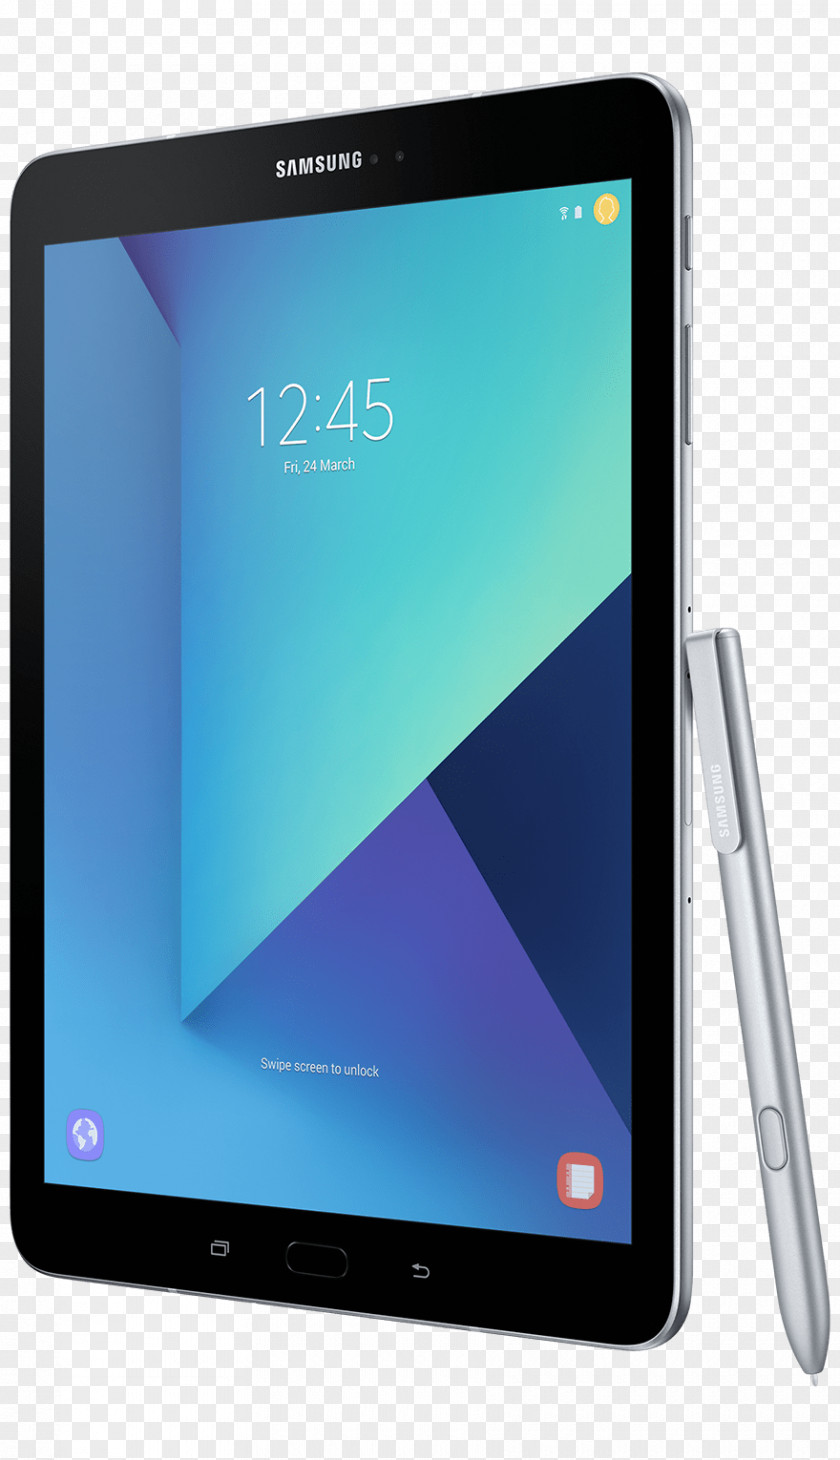 Samsung Galaxy Tab S2 8.0 LTE Wi-Fi Android PNG